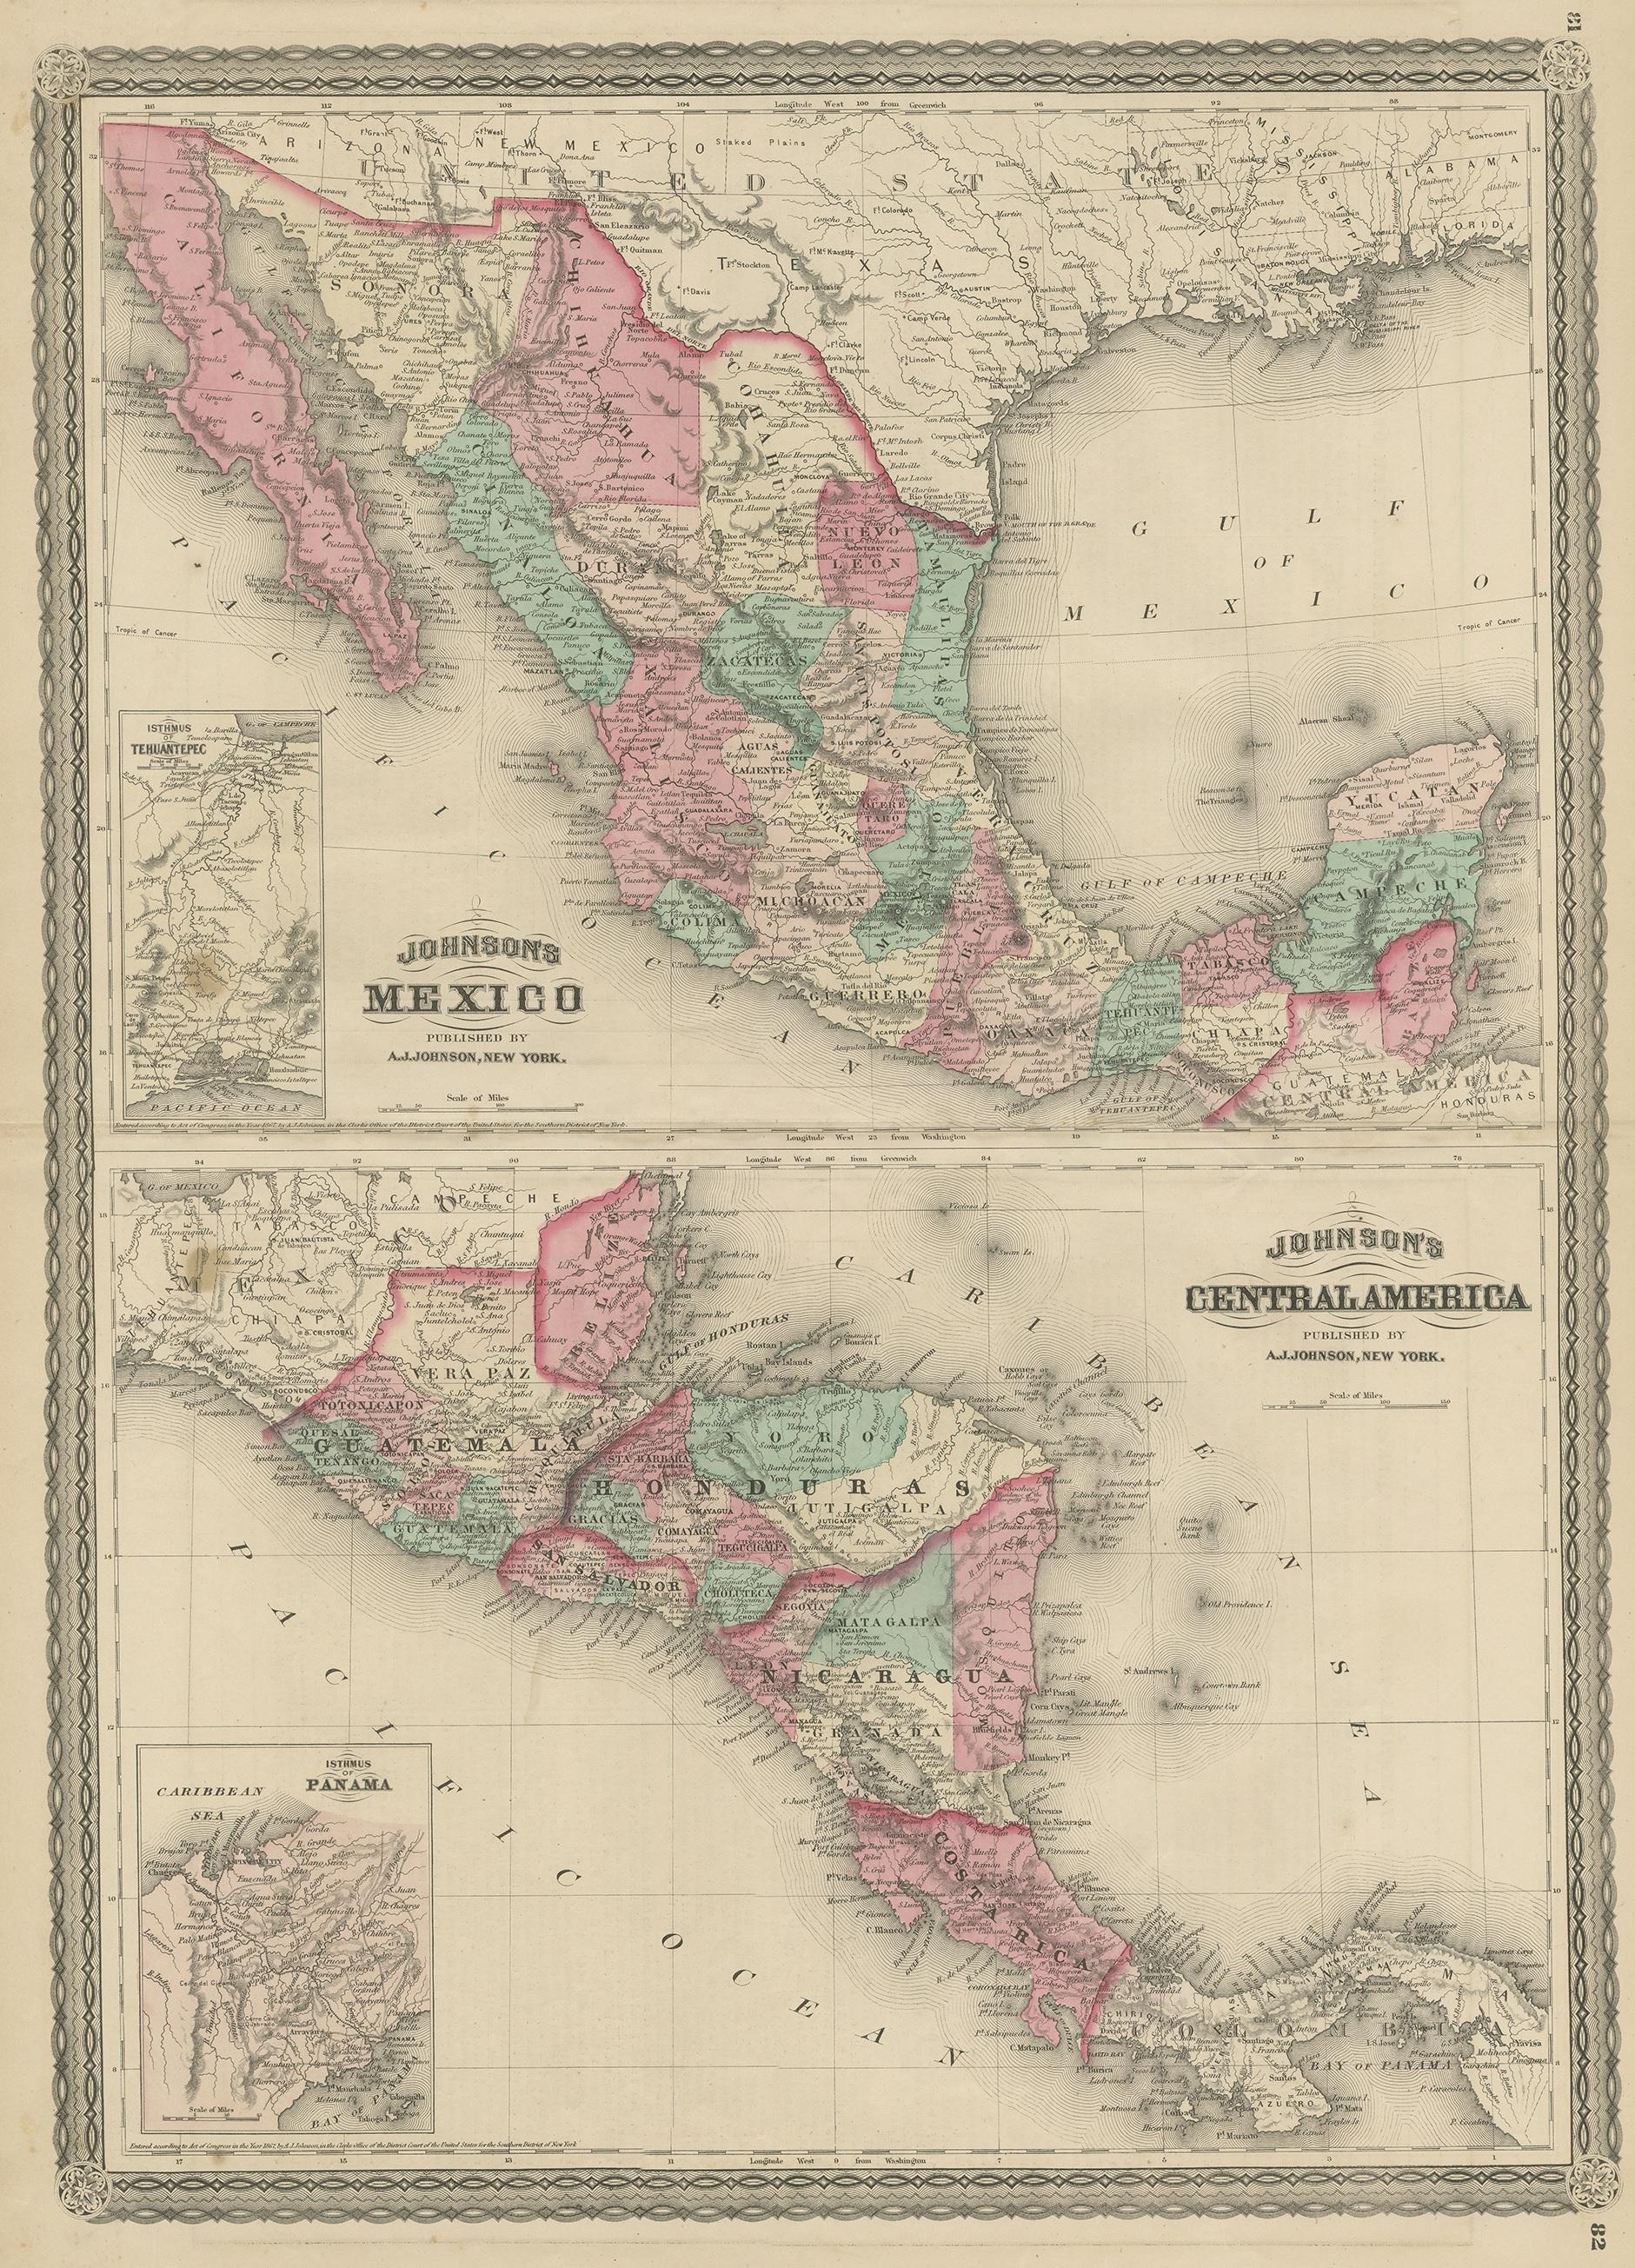 Antique map titled 'Johnson's Mexico (..)'. Two maps one one sheet showing Mexico and Central America, with inset maps of Tehuantepec and Panama. This map originates from 'Johnson's New Illustrated Family Atlas of the World' by A.J. Johnson.